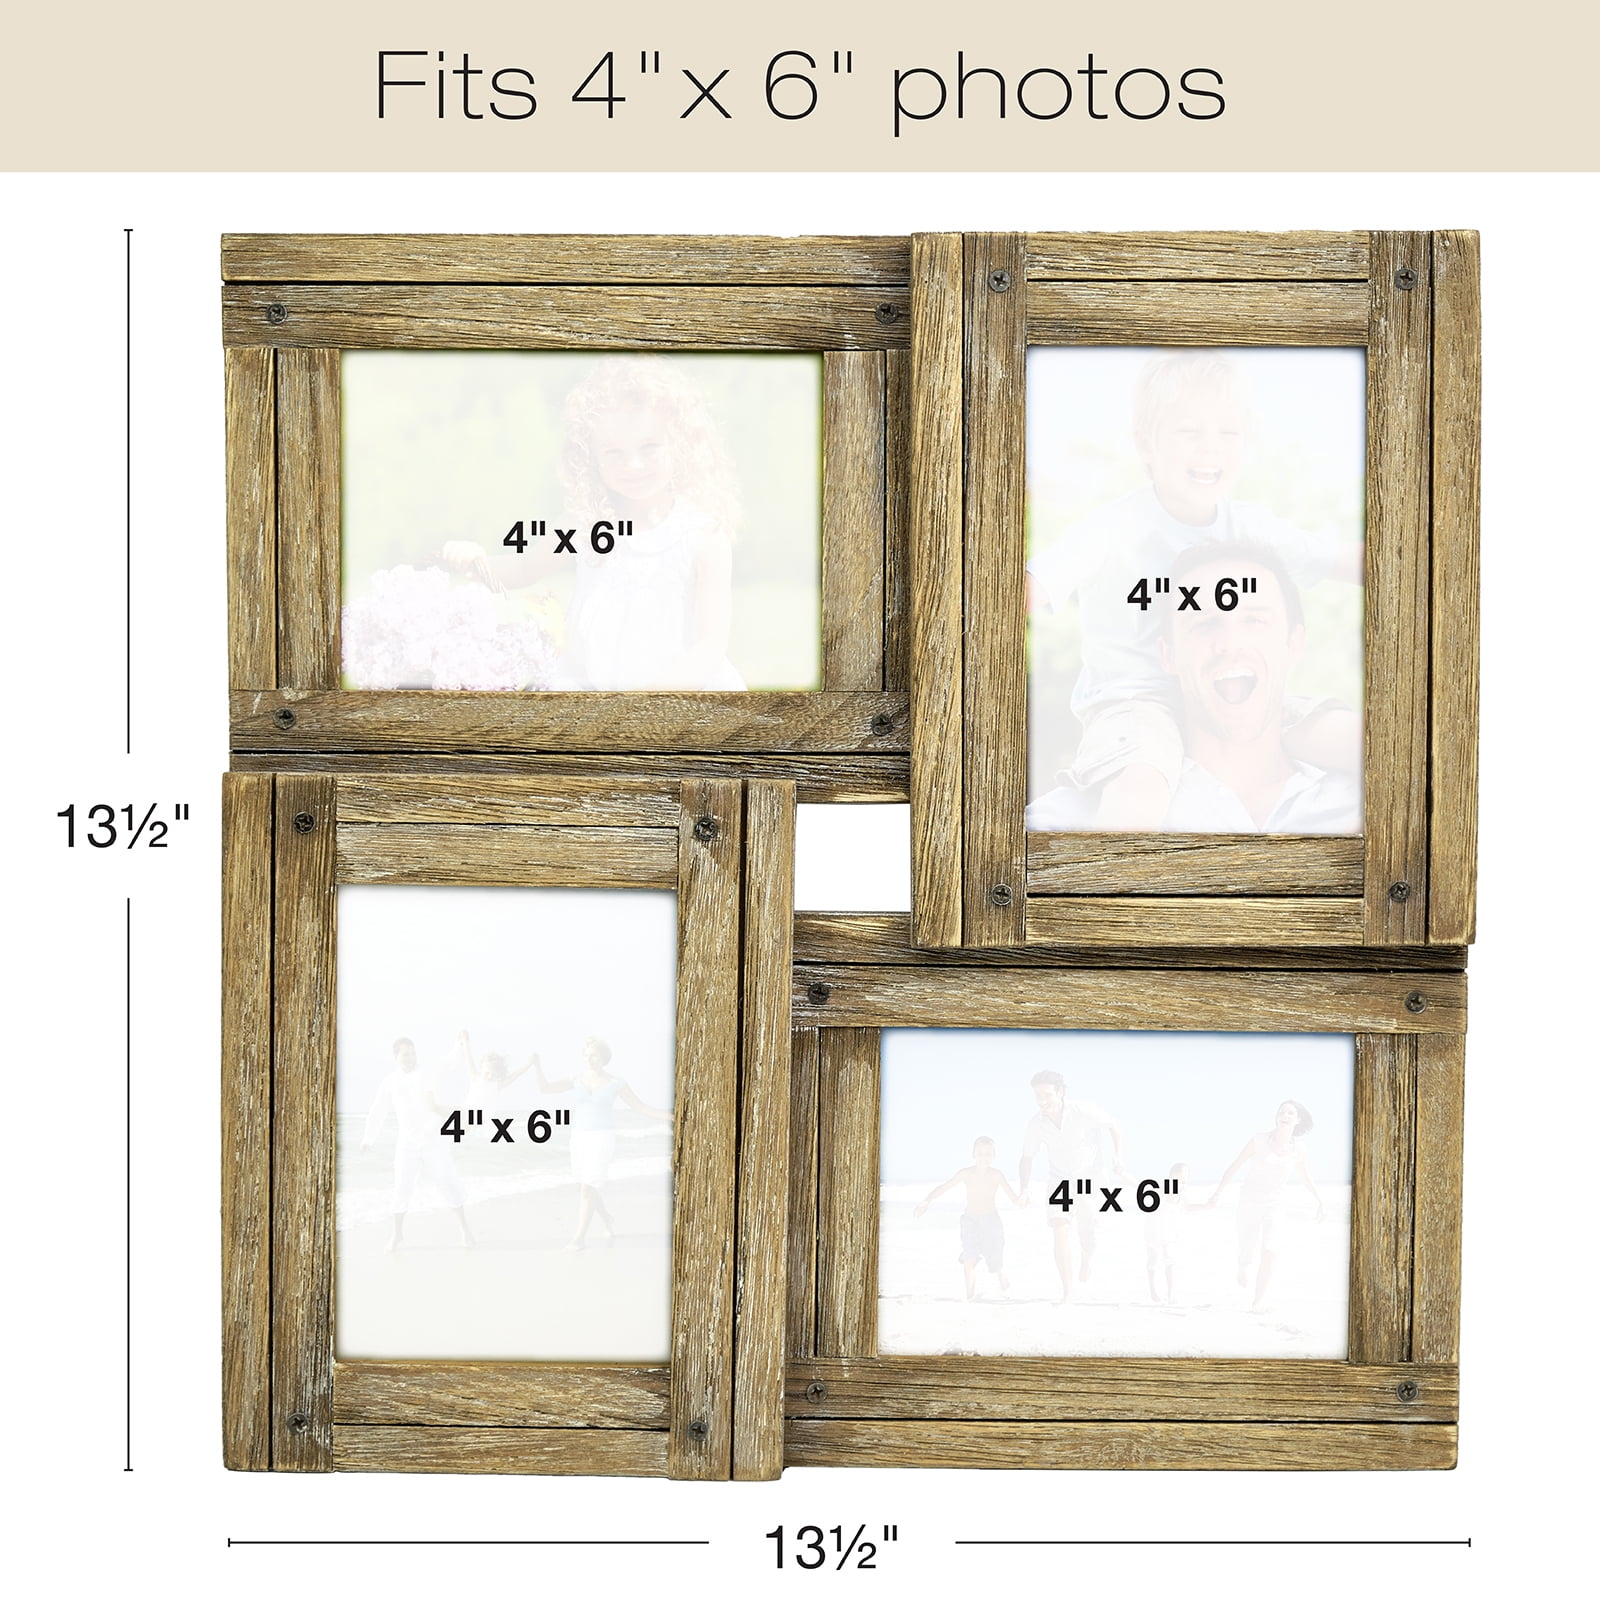 POILKMNI 4 Folding 4x6 inch Hinged Picture Frame, High Definition Natural Wood Picture Frame, Rustic Desktop Acrylic Frame Family Photo Collage for